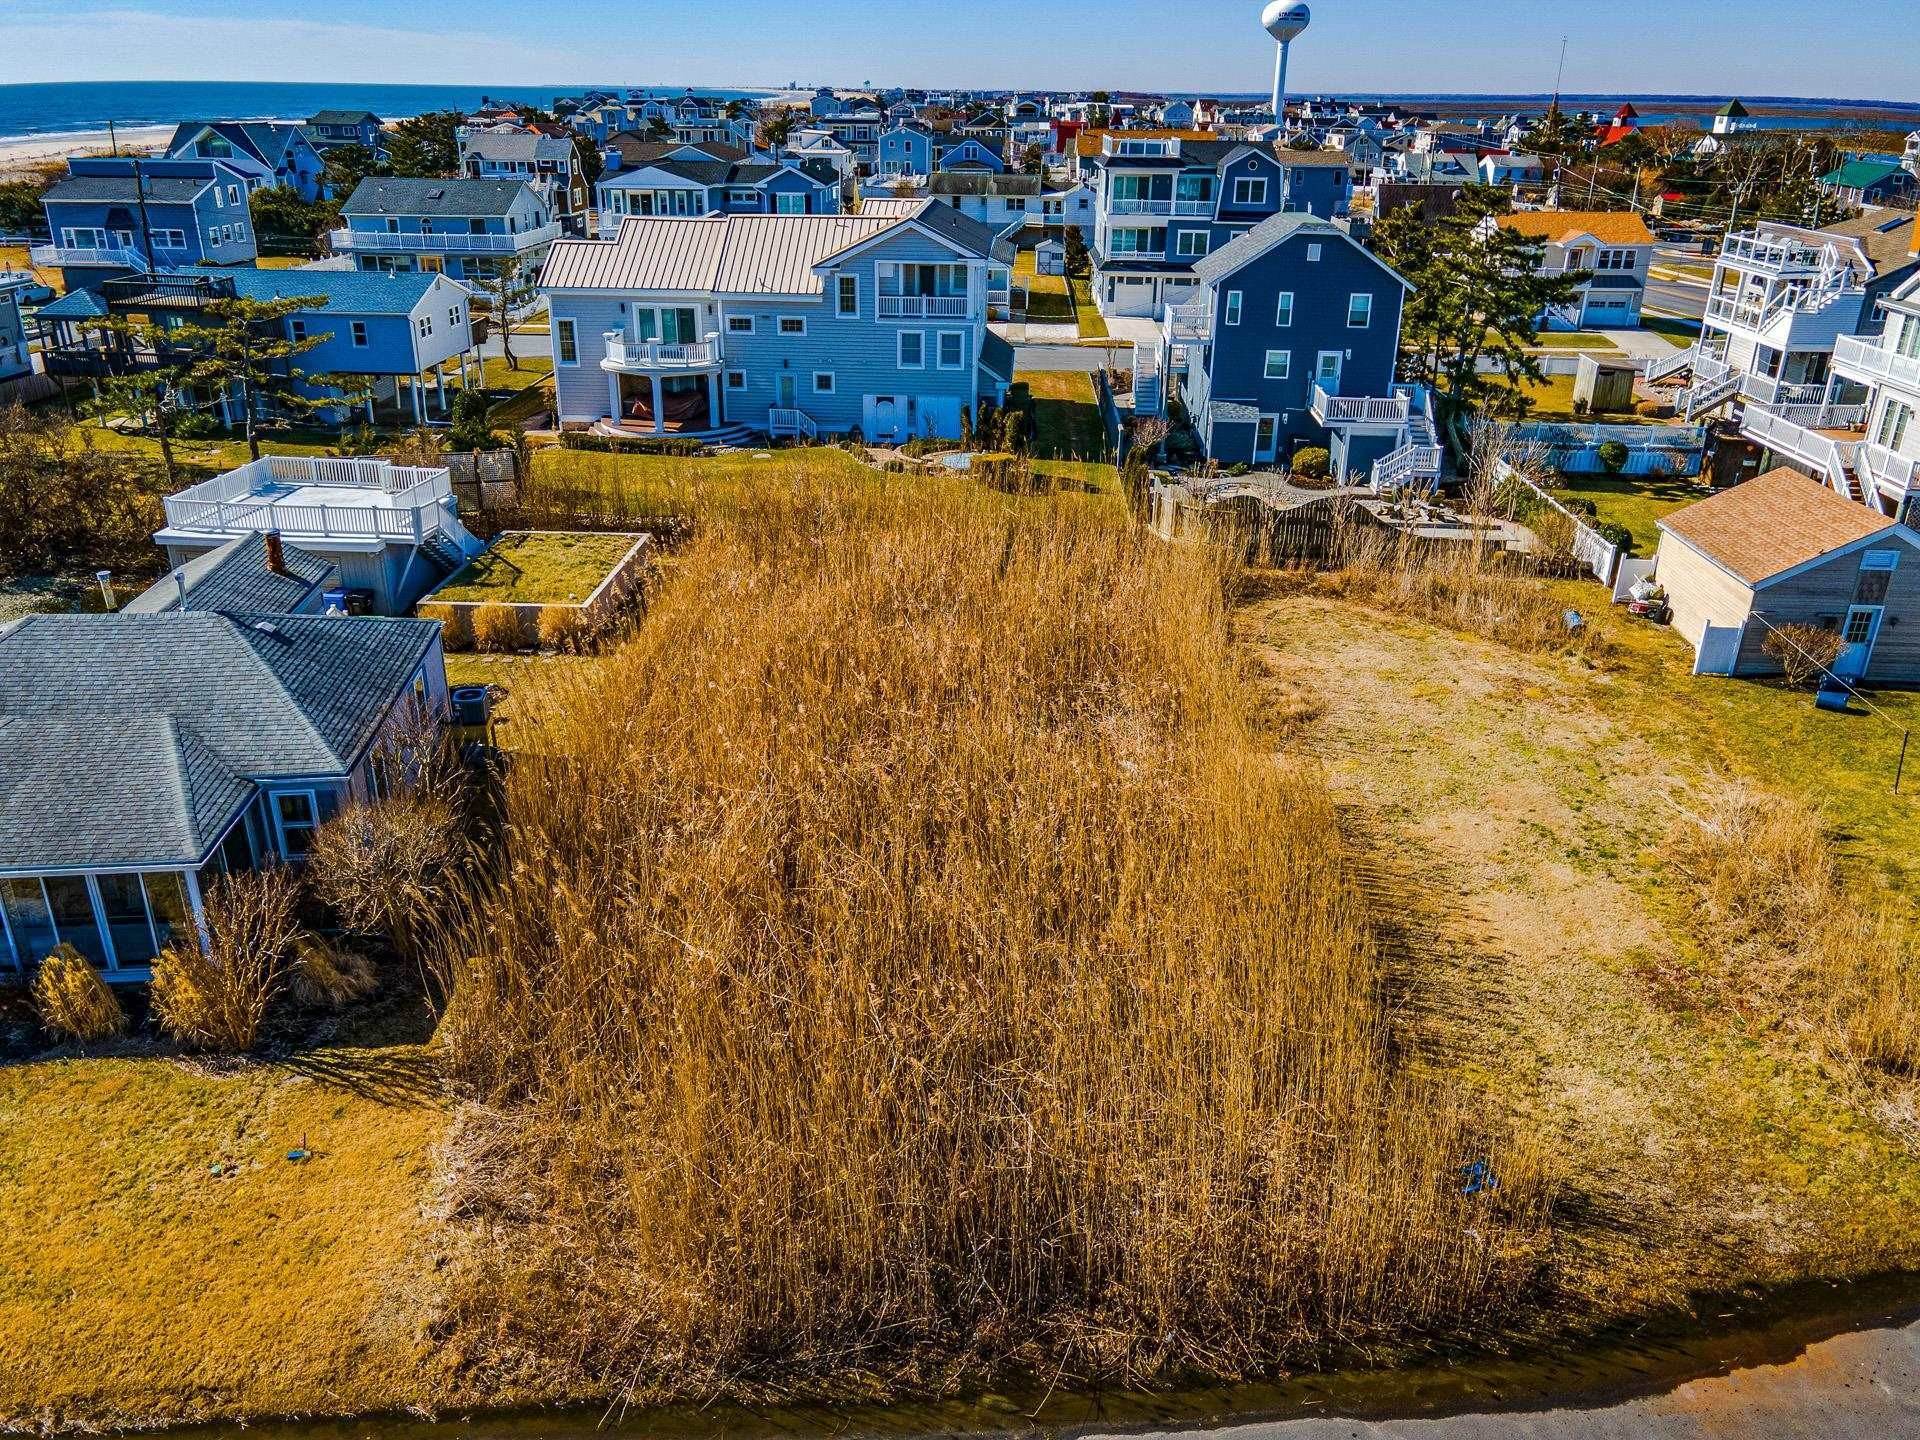 Land for Sale at 10 E Winthrop Avenue Strathmere, New Jersey 08248 United States